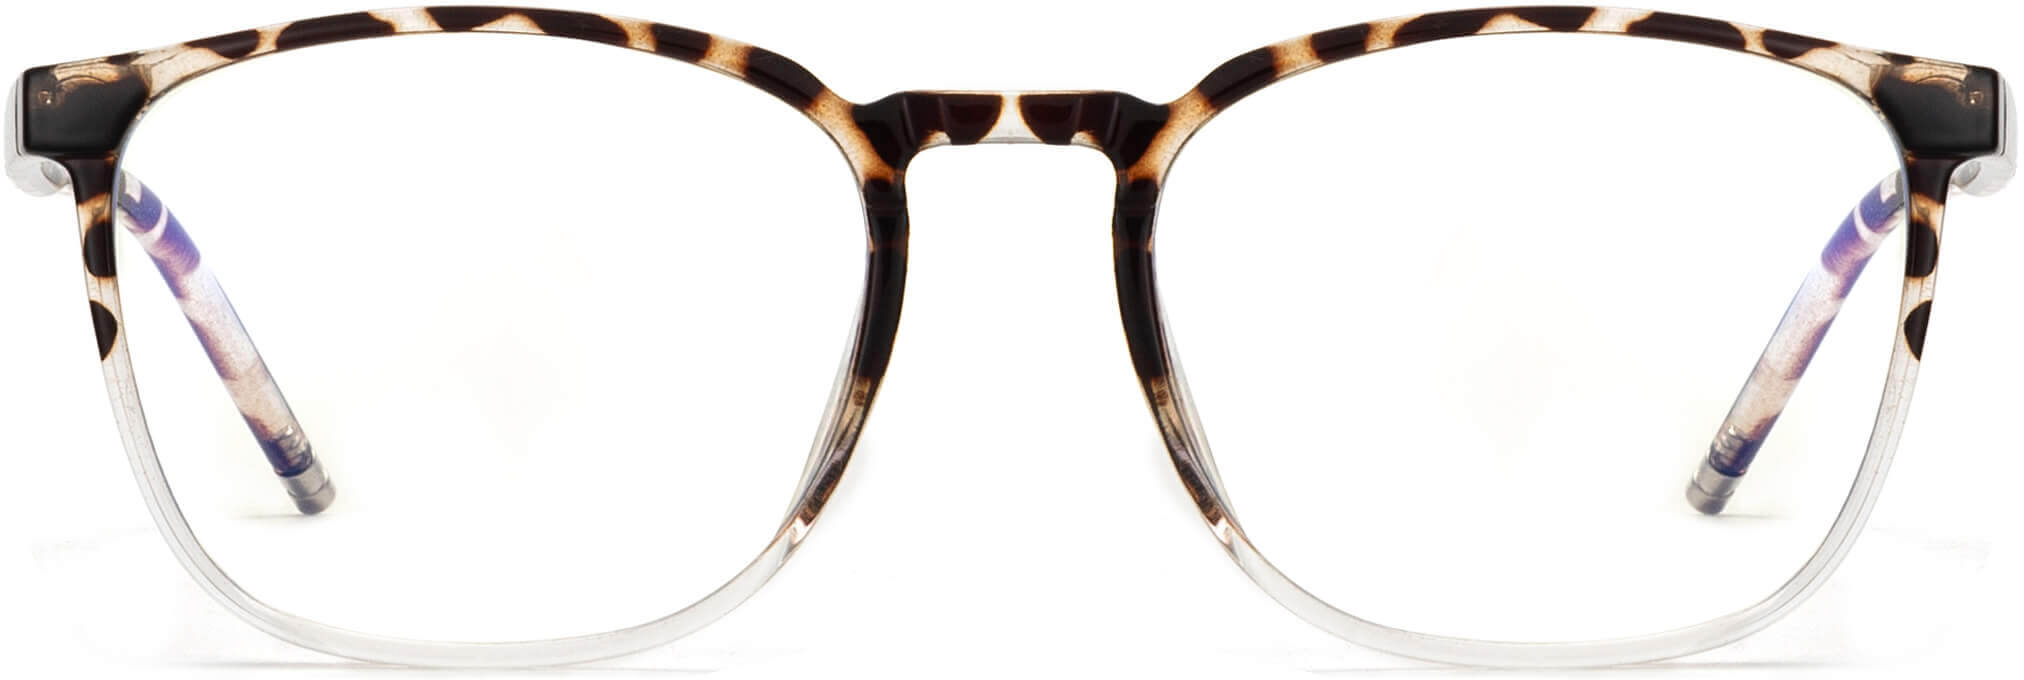 Lennon Leopard TR90 Eyeglasses from ANRRI, Front View